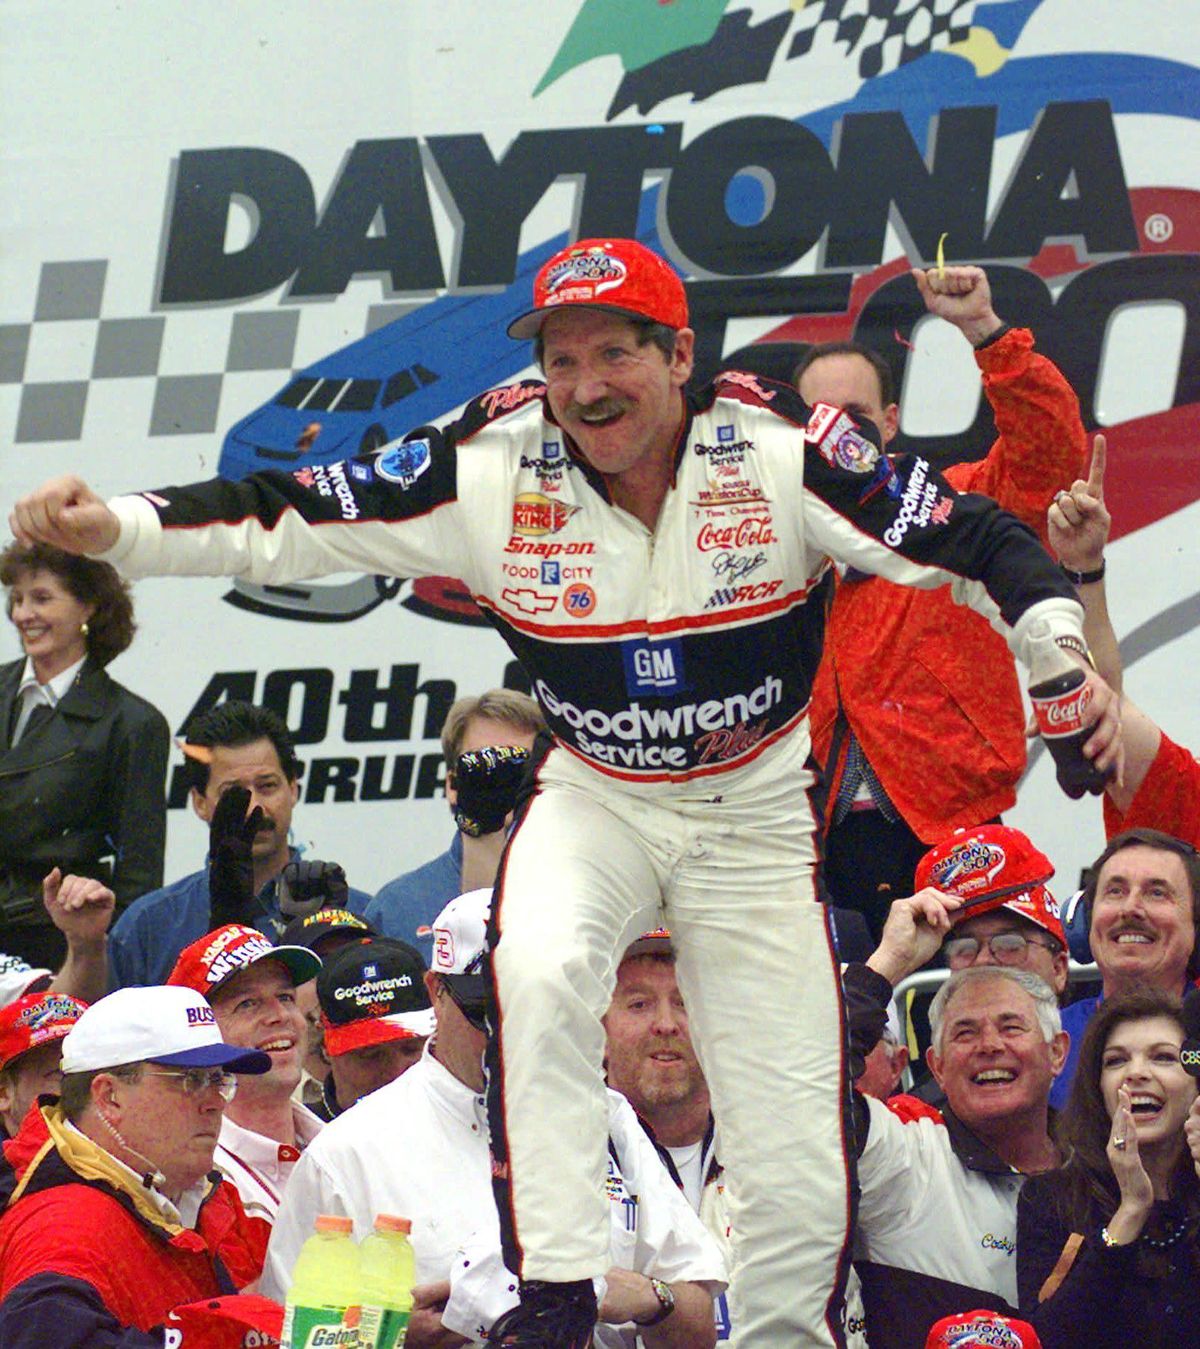 In this Feb. 15, 1998, file photo, Dale Earnhardt smiles in Victory Lane after winning the NASCAR Daytona 500 auto race at Daytona International Speedway in Daytona Beach, Fla. Earnhardt had lost 14 times driving the famed No. 3 car for Richard Childress Racing, and both men desperately wanted to avoid more heartache. It all changed on Feb. 15, 1998. At 46, Earnhardt was the sentimental choice and, at last, won “The Great American Race.” It’s a NASCAR moment that has stood the test of time. It included a lucky penny and a pit-road processional never before seen in auto racing. (Chris O’Meara / Associated Press)